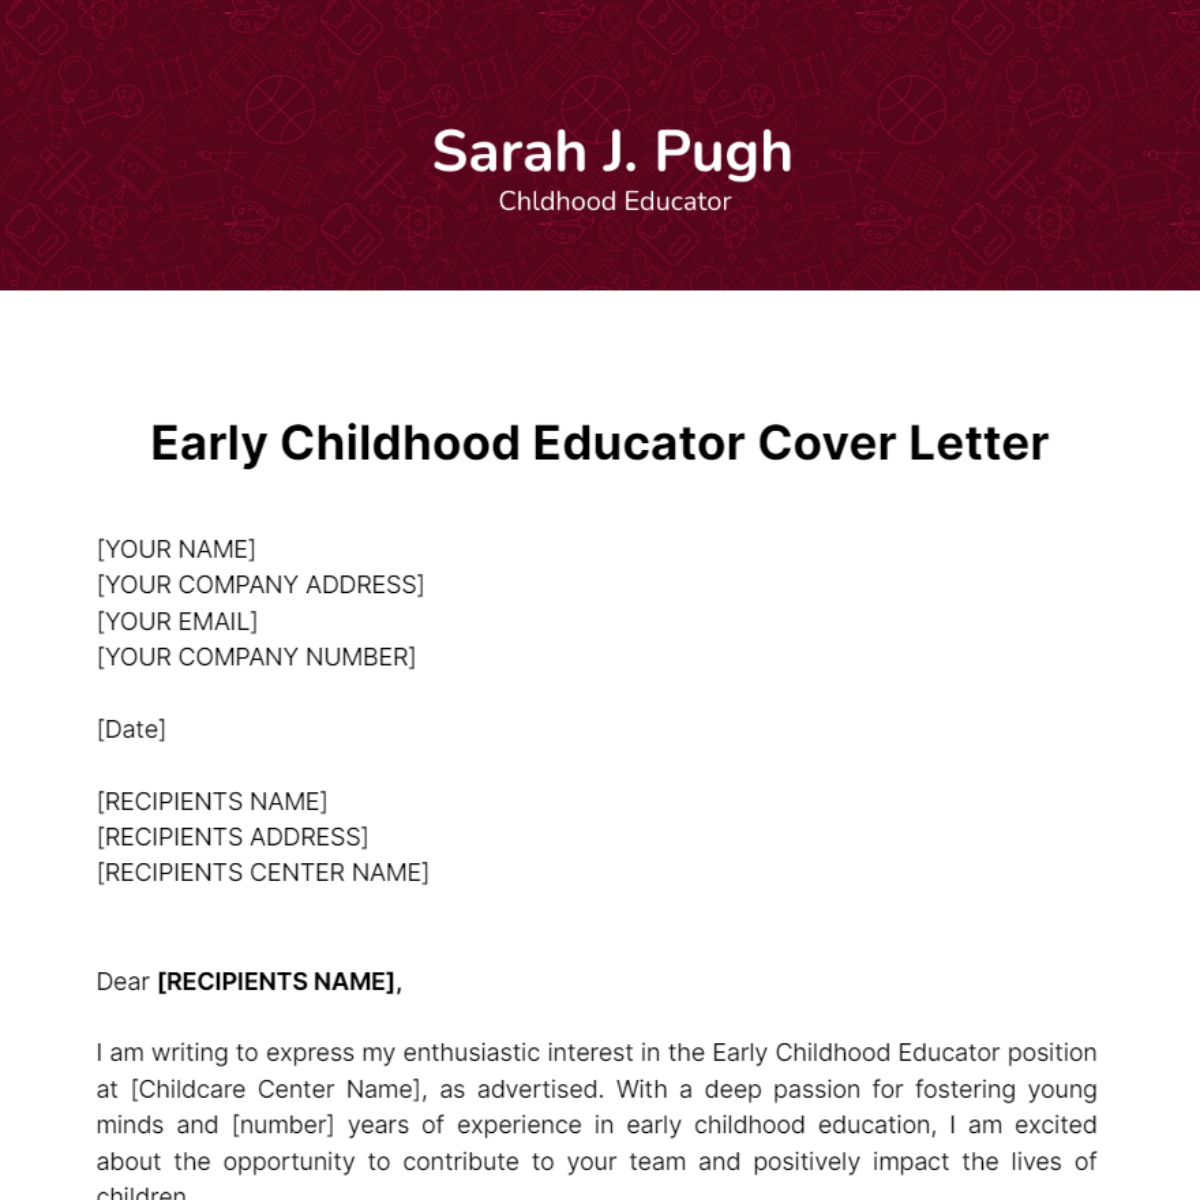 Early Childhood Educator Cover Letter Template